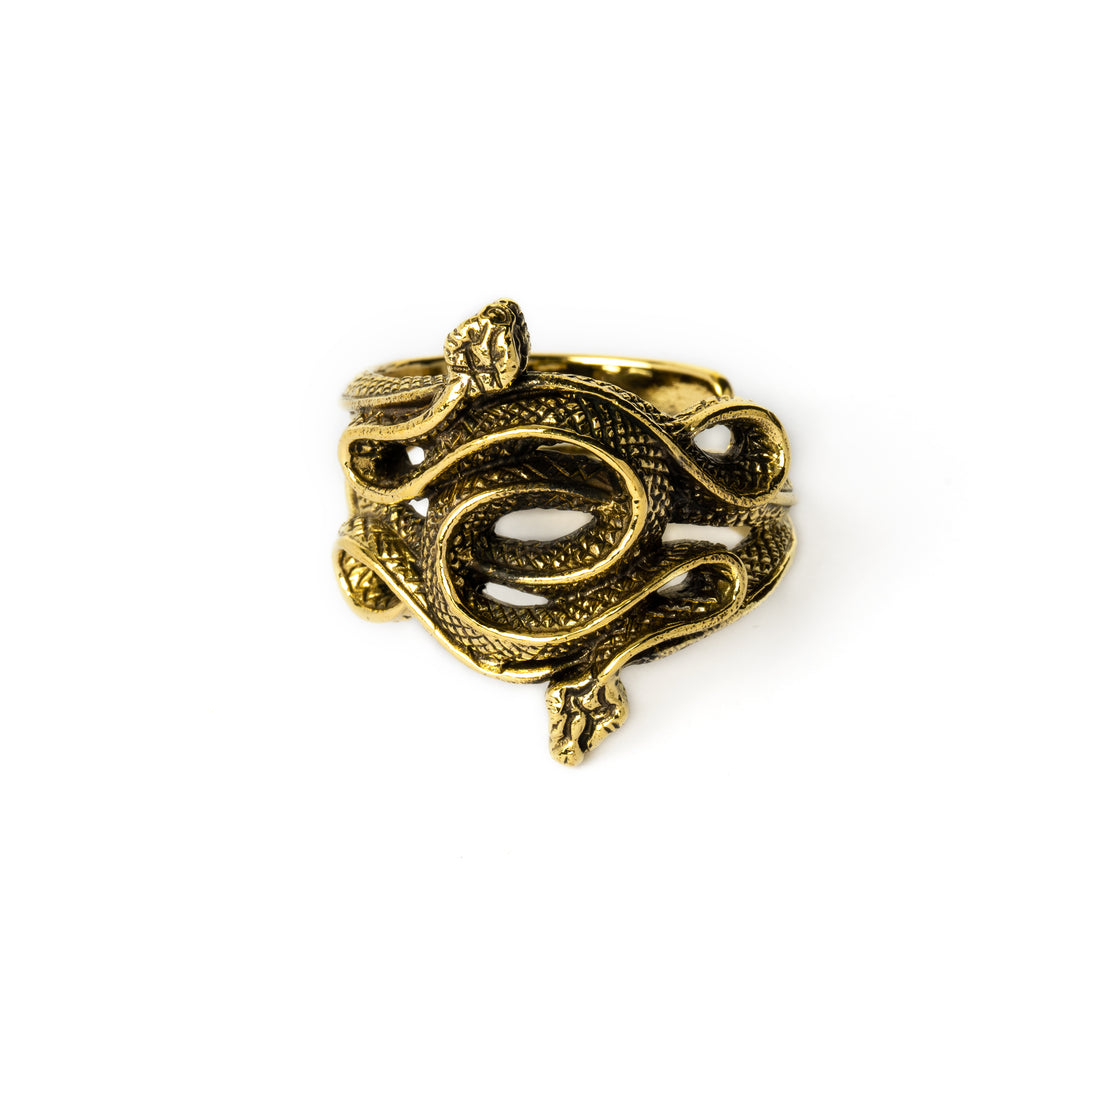 Golden brass Entwined Serpents adjustable ring frontal view